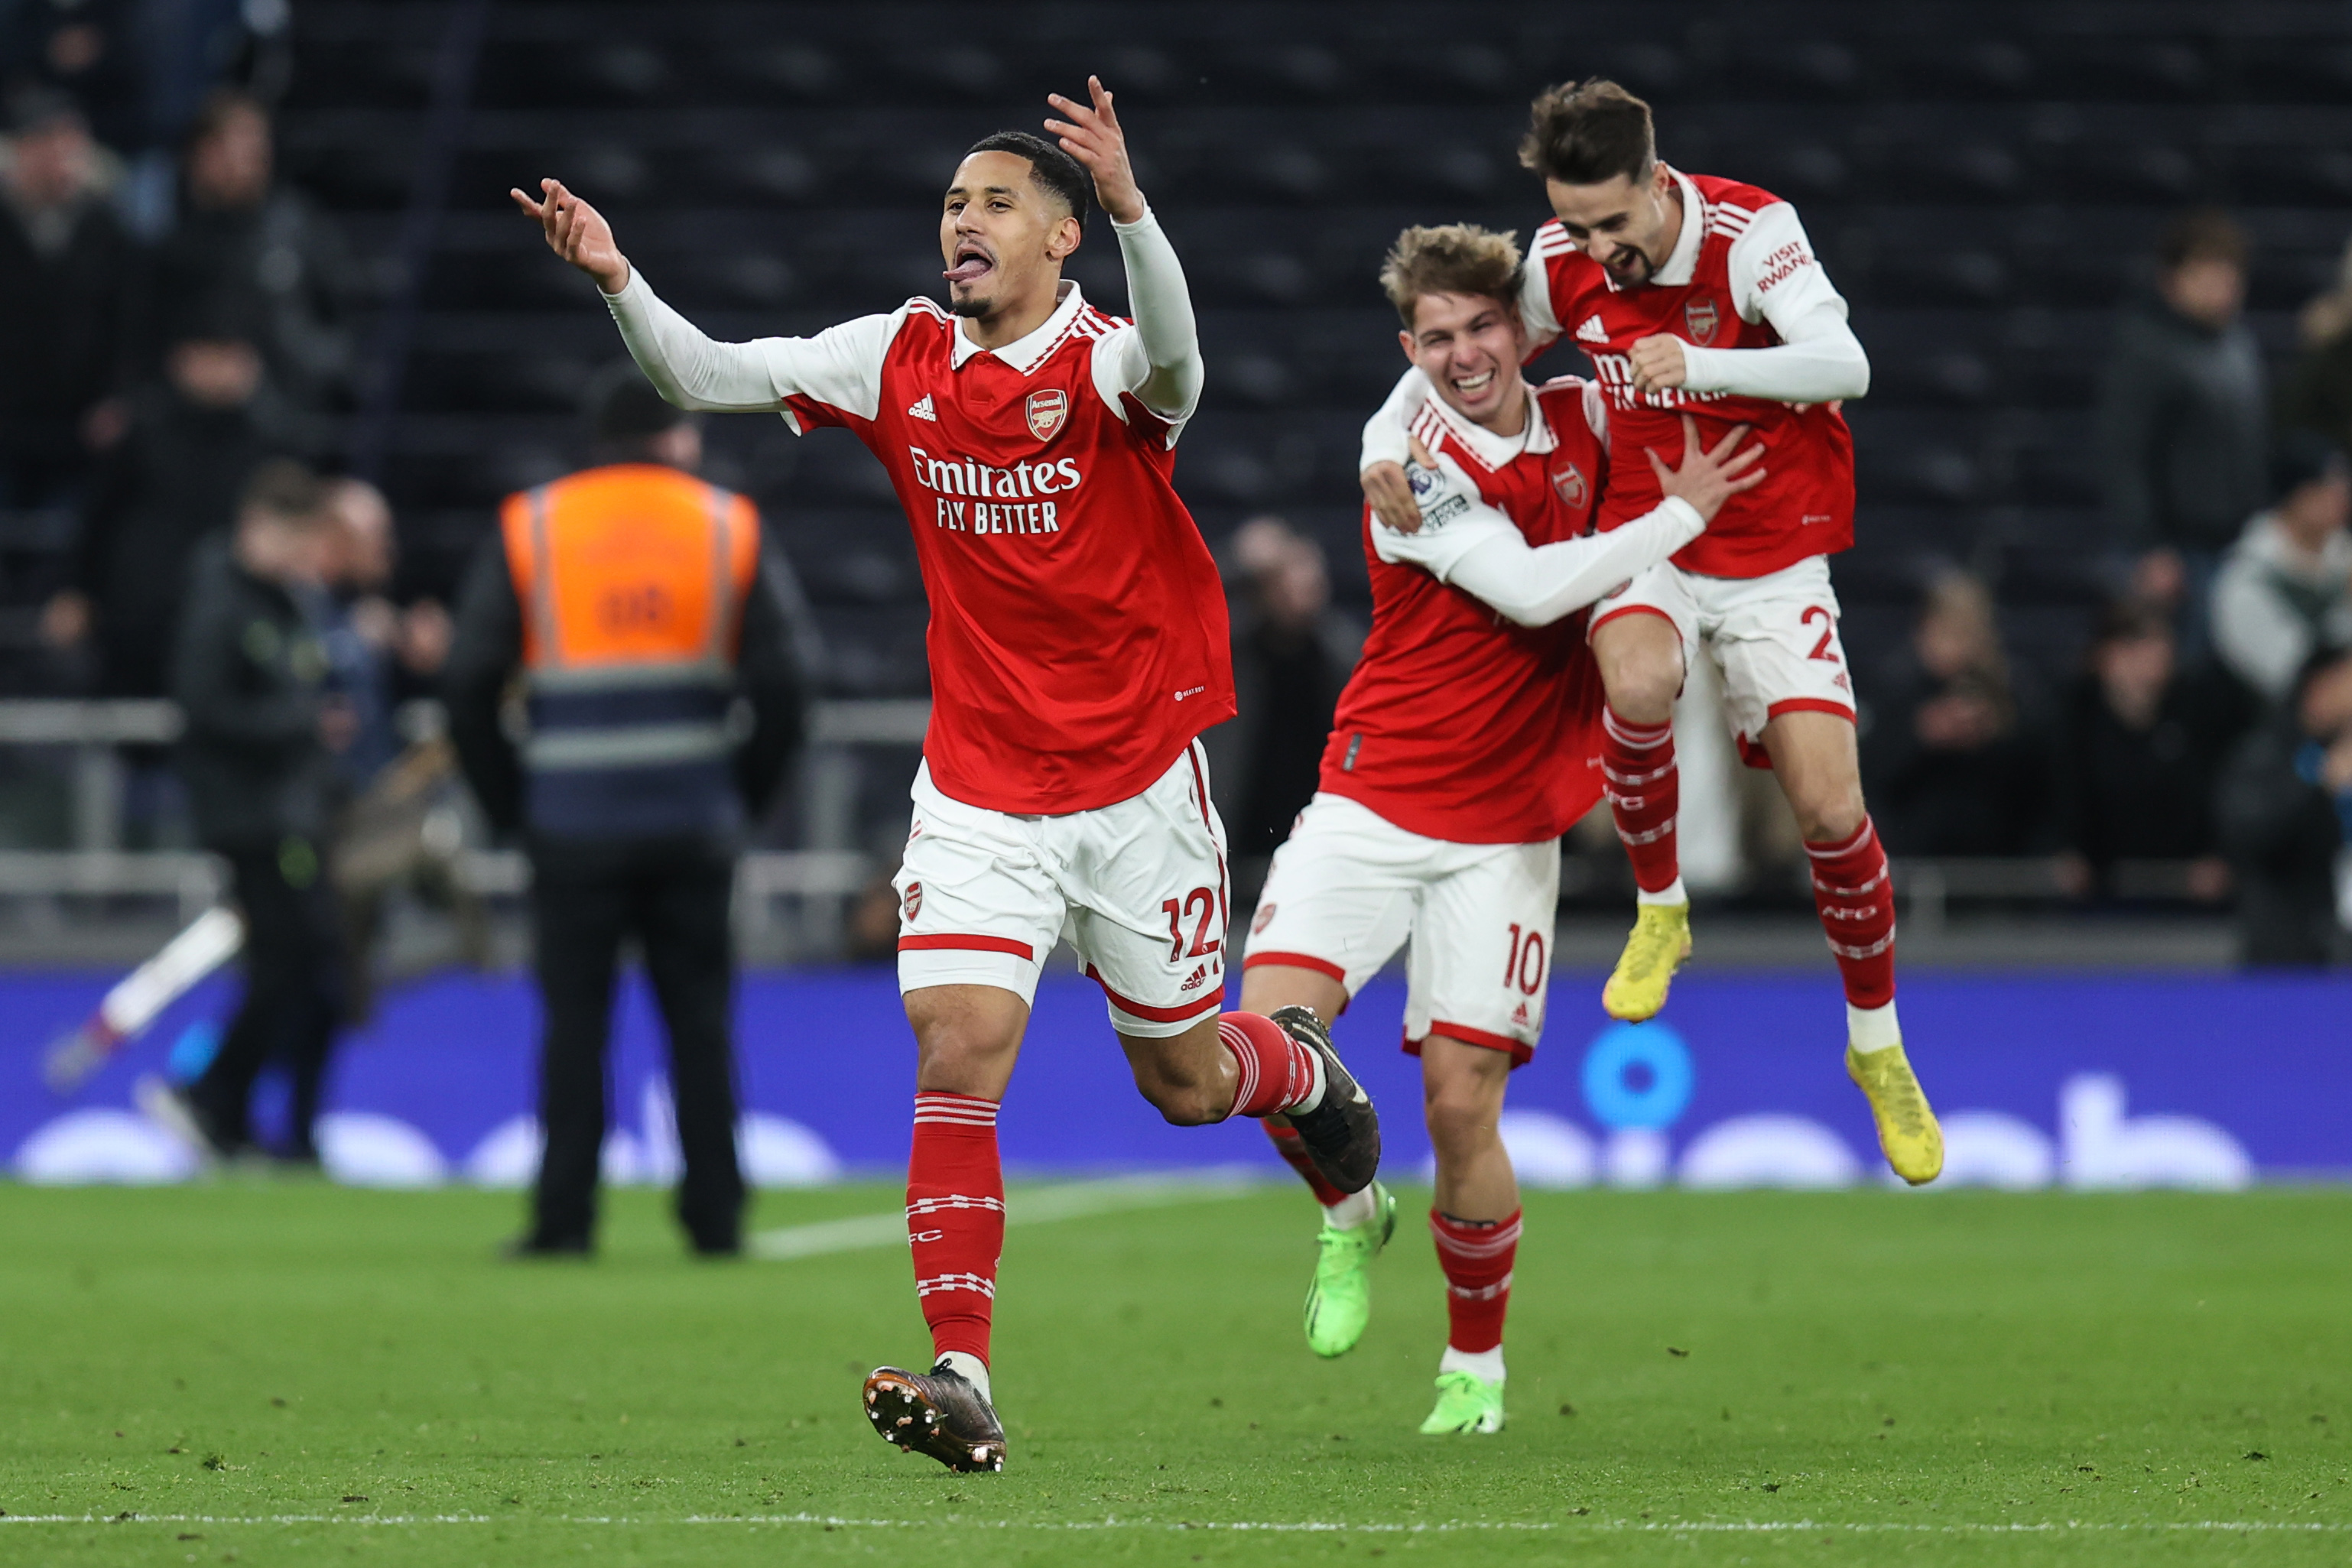 William Saliba talks the north London derby, Manchester United and delight with life at Arsenal